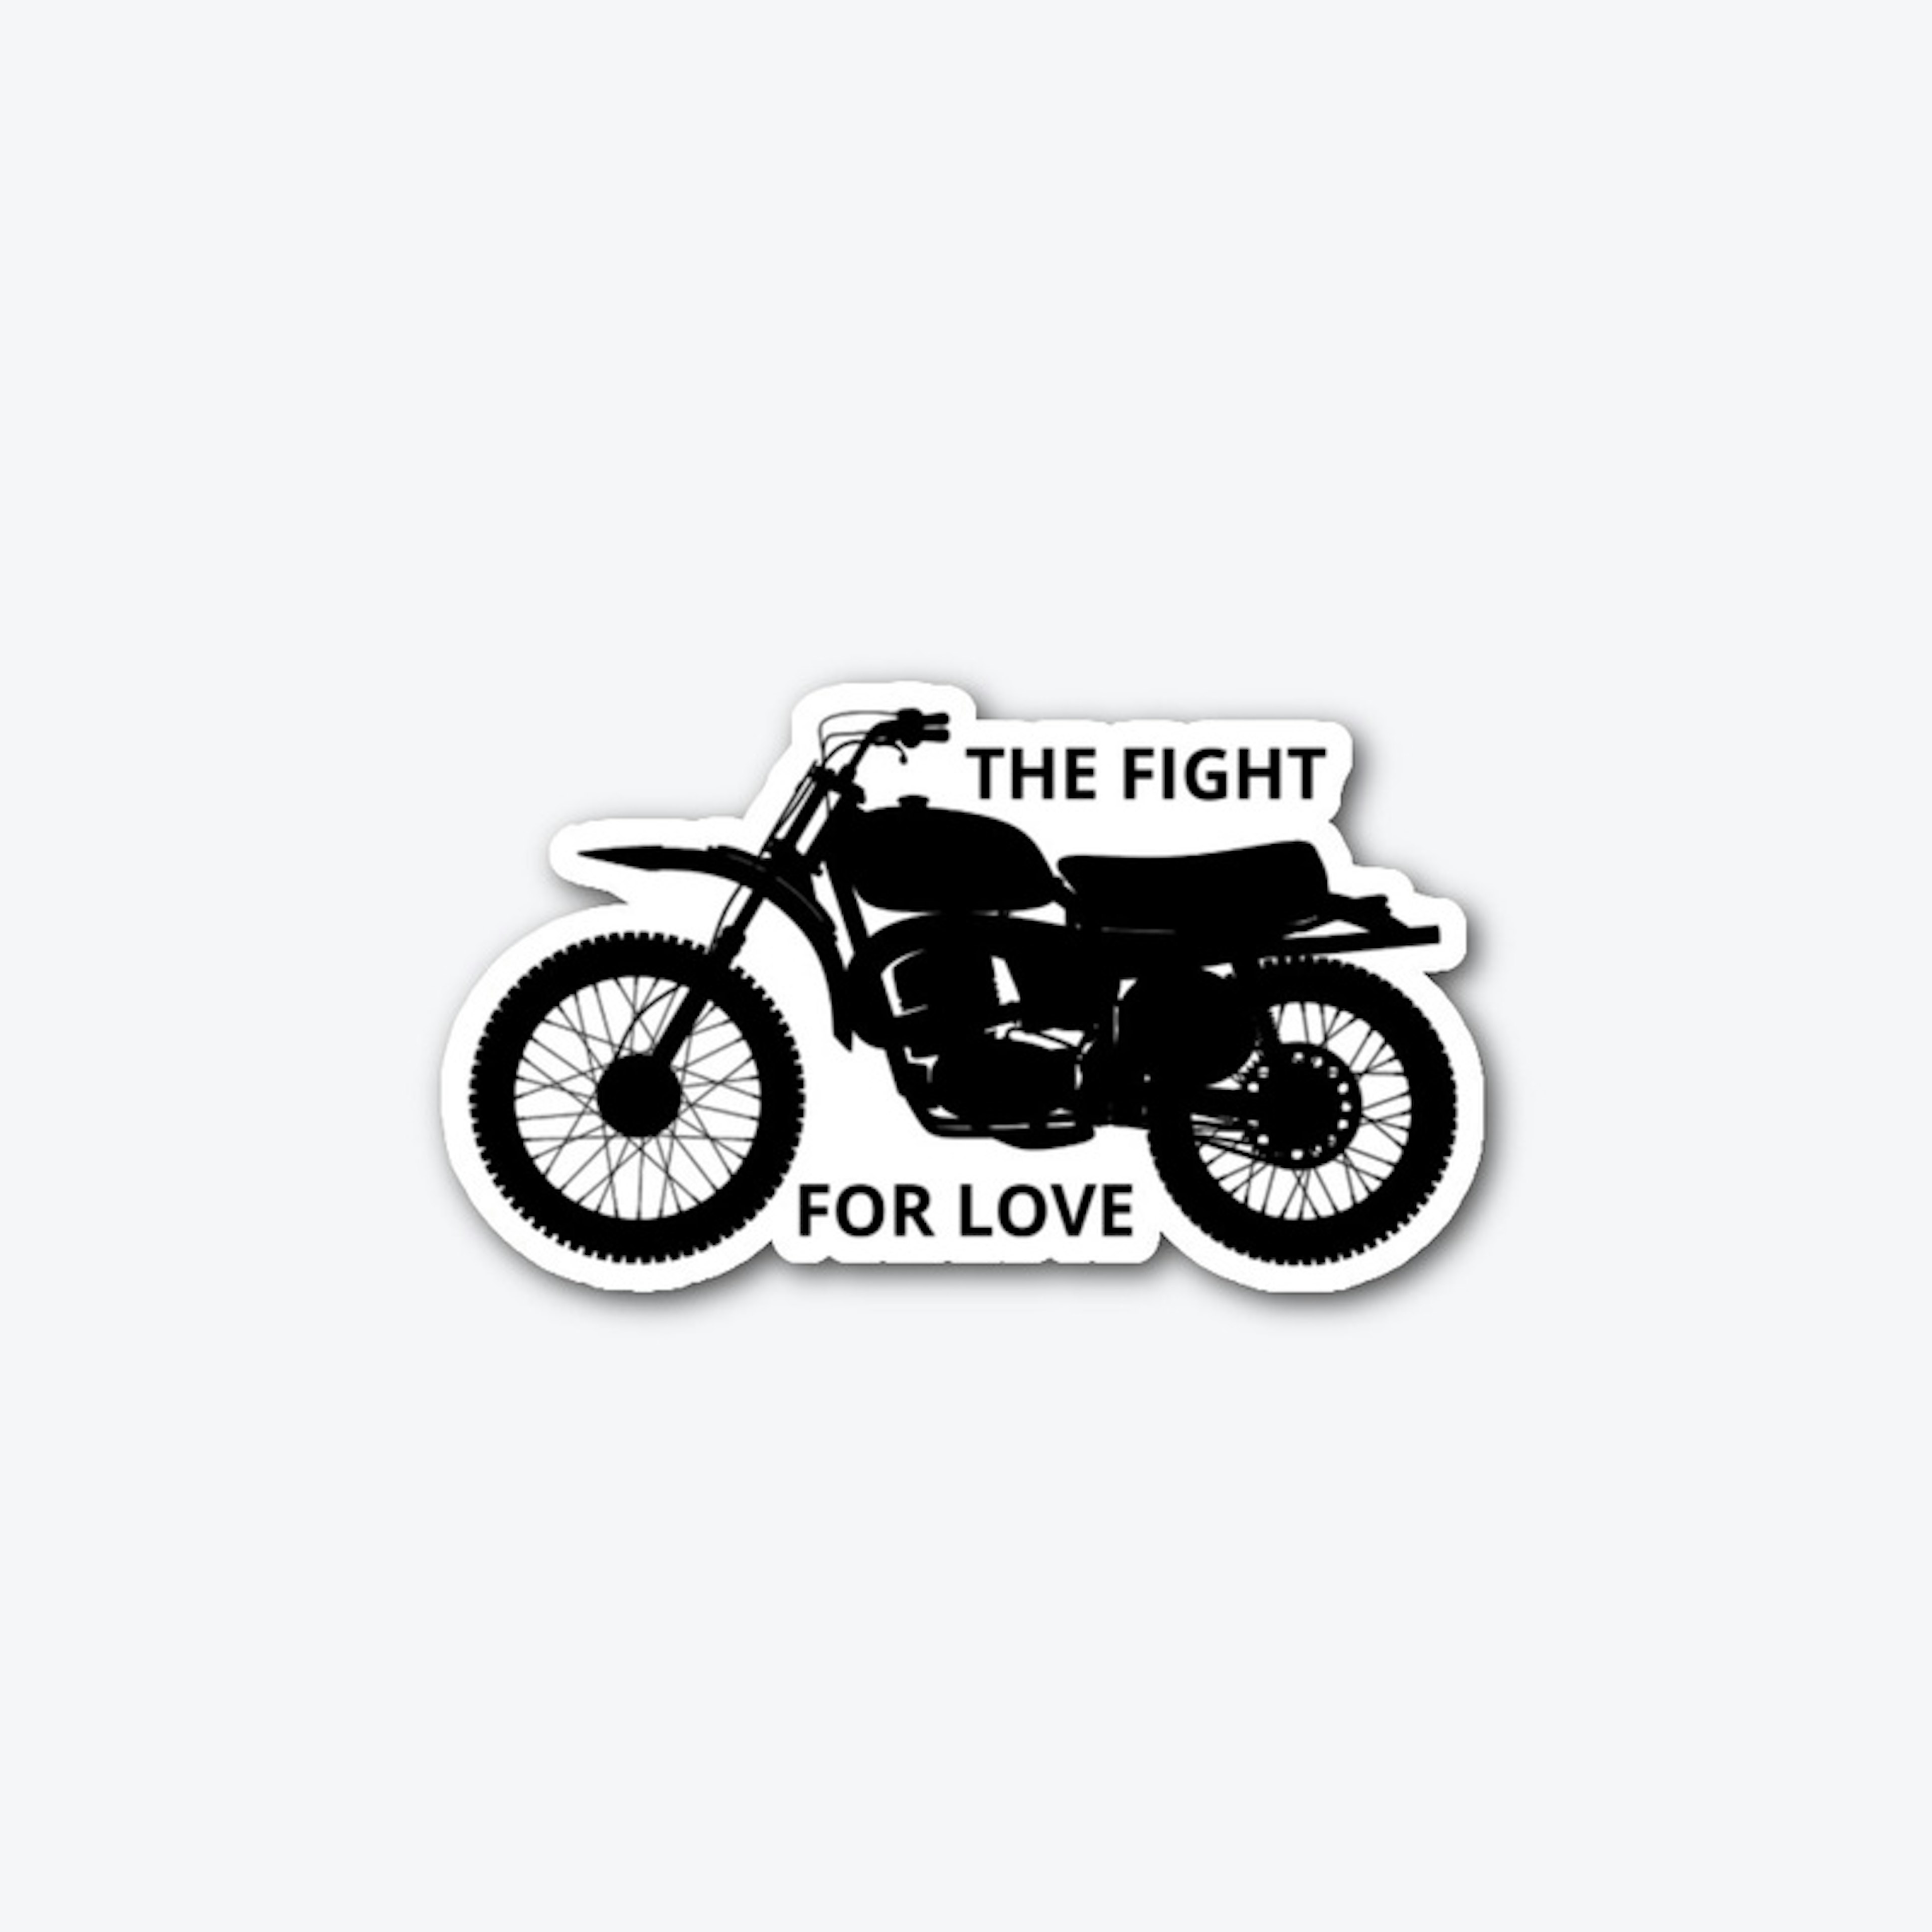 THE FIGHT FOR LOVE STICKER